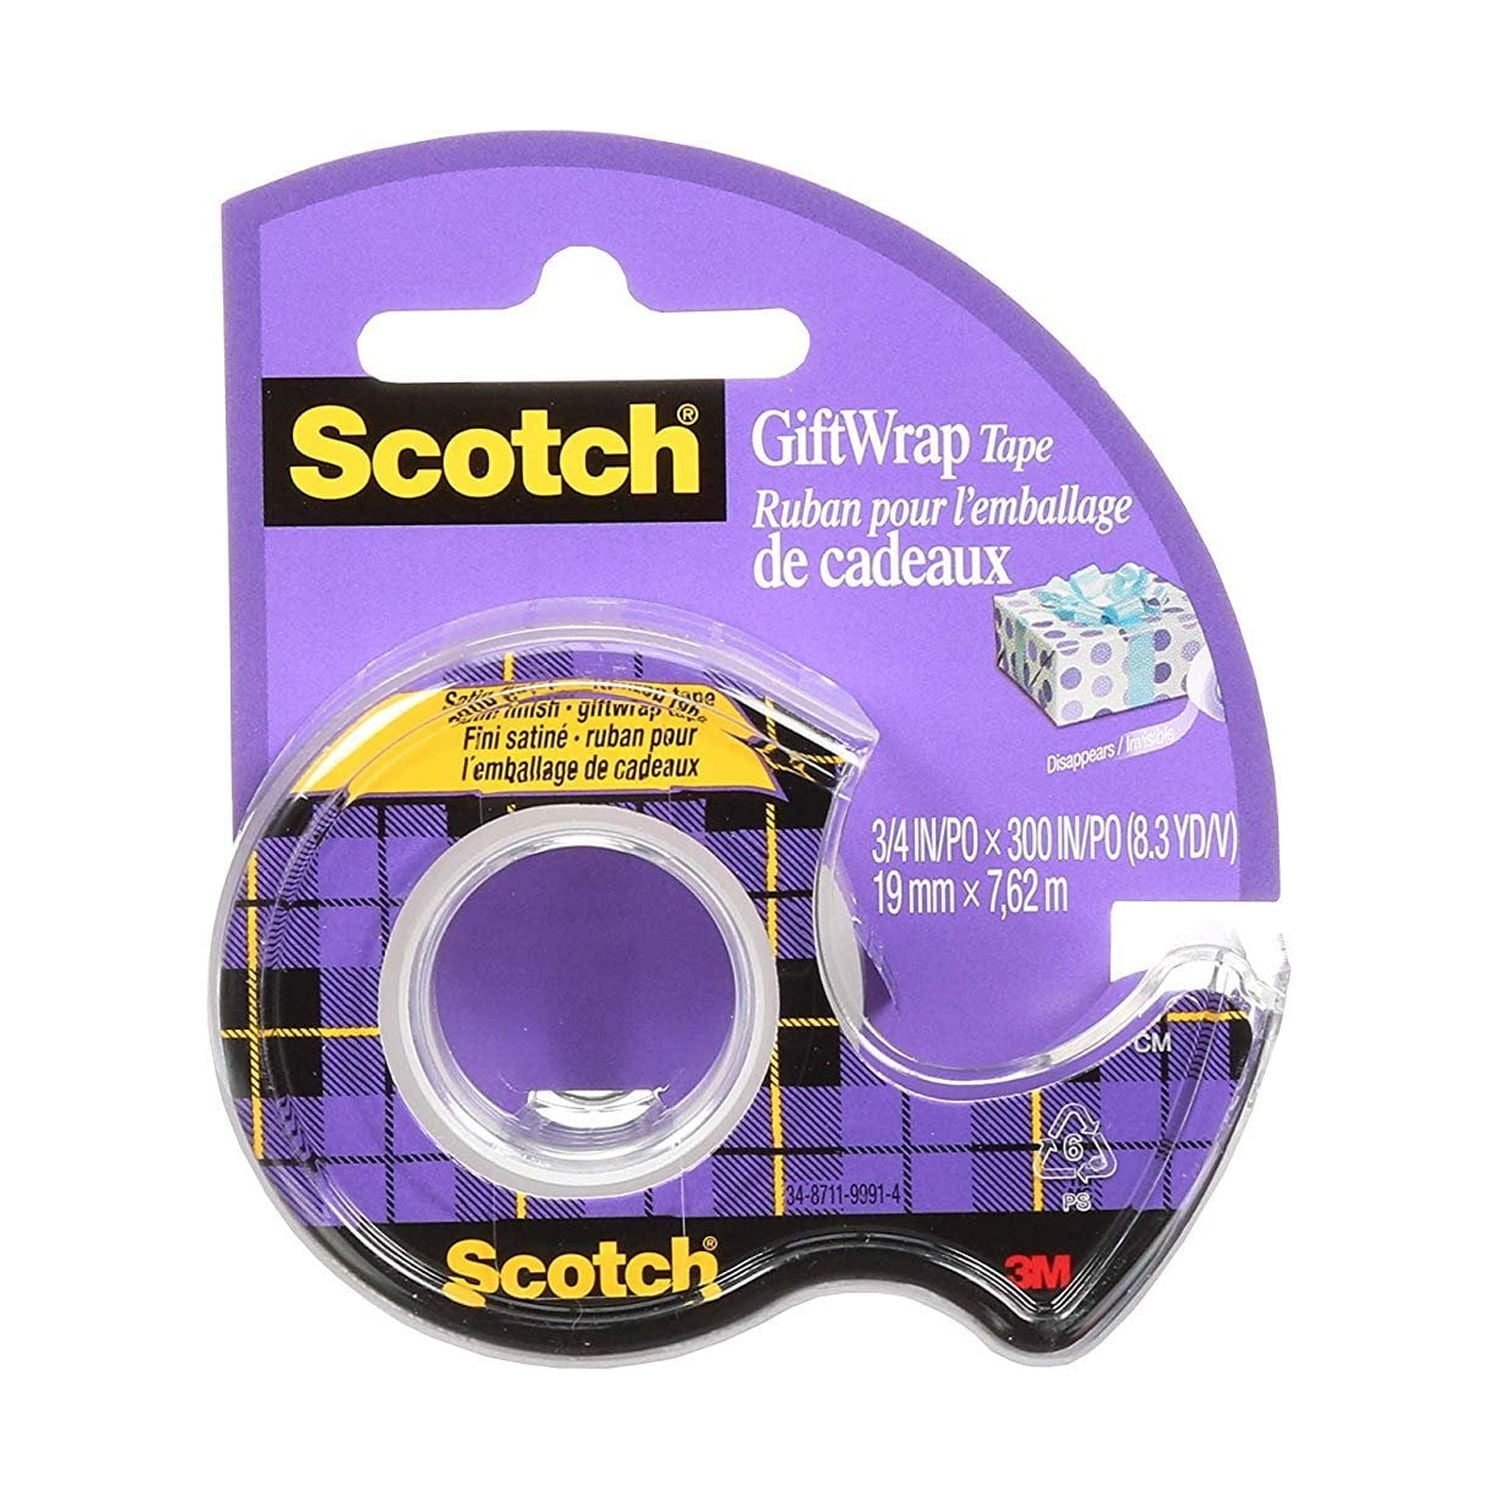 Scotch Gift-Wrap Tape 3/4 IN x 350 IN Disappears Flawlessly 3 ROLLS PACK  [hidden information]2 - Painting Tools, Facebook Marketplace